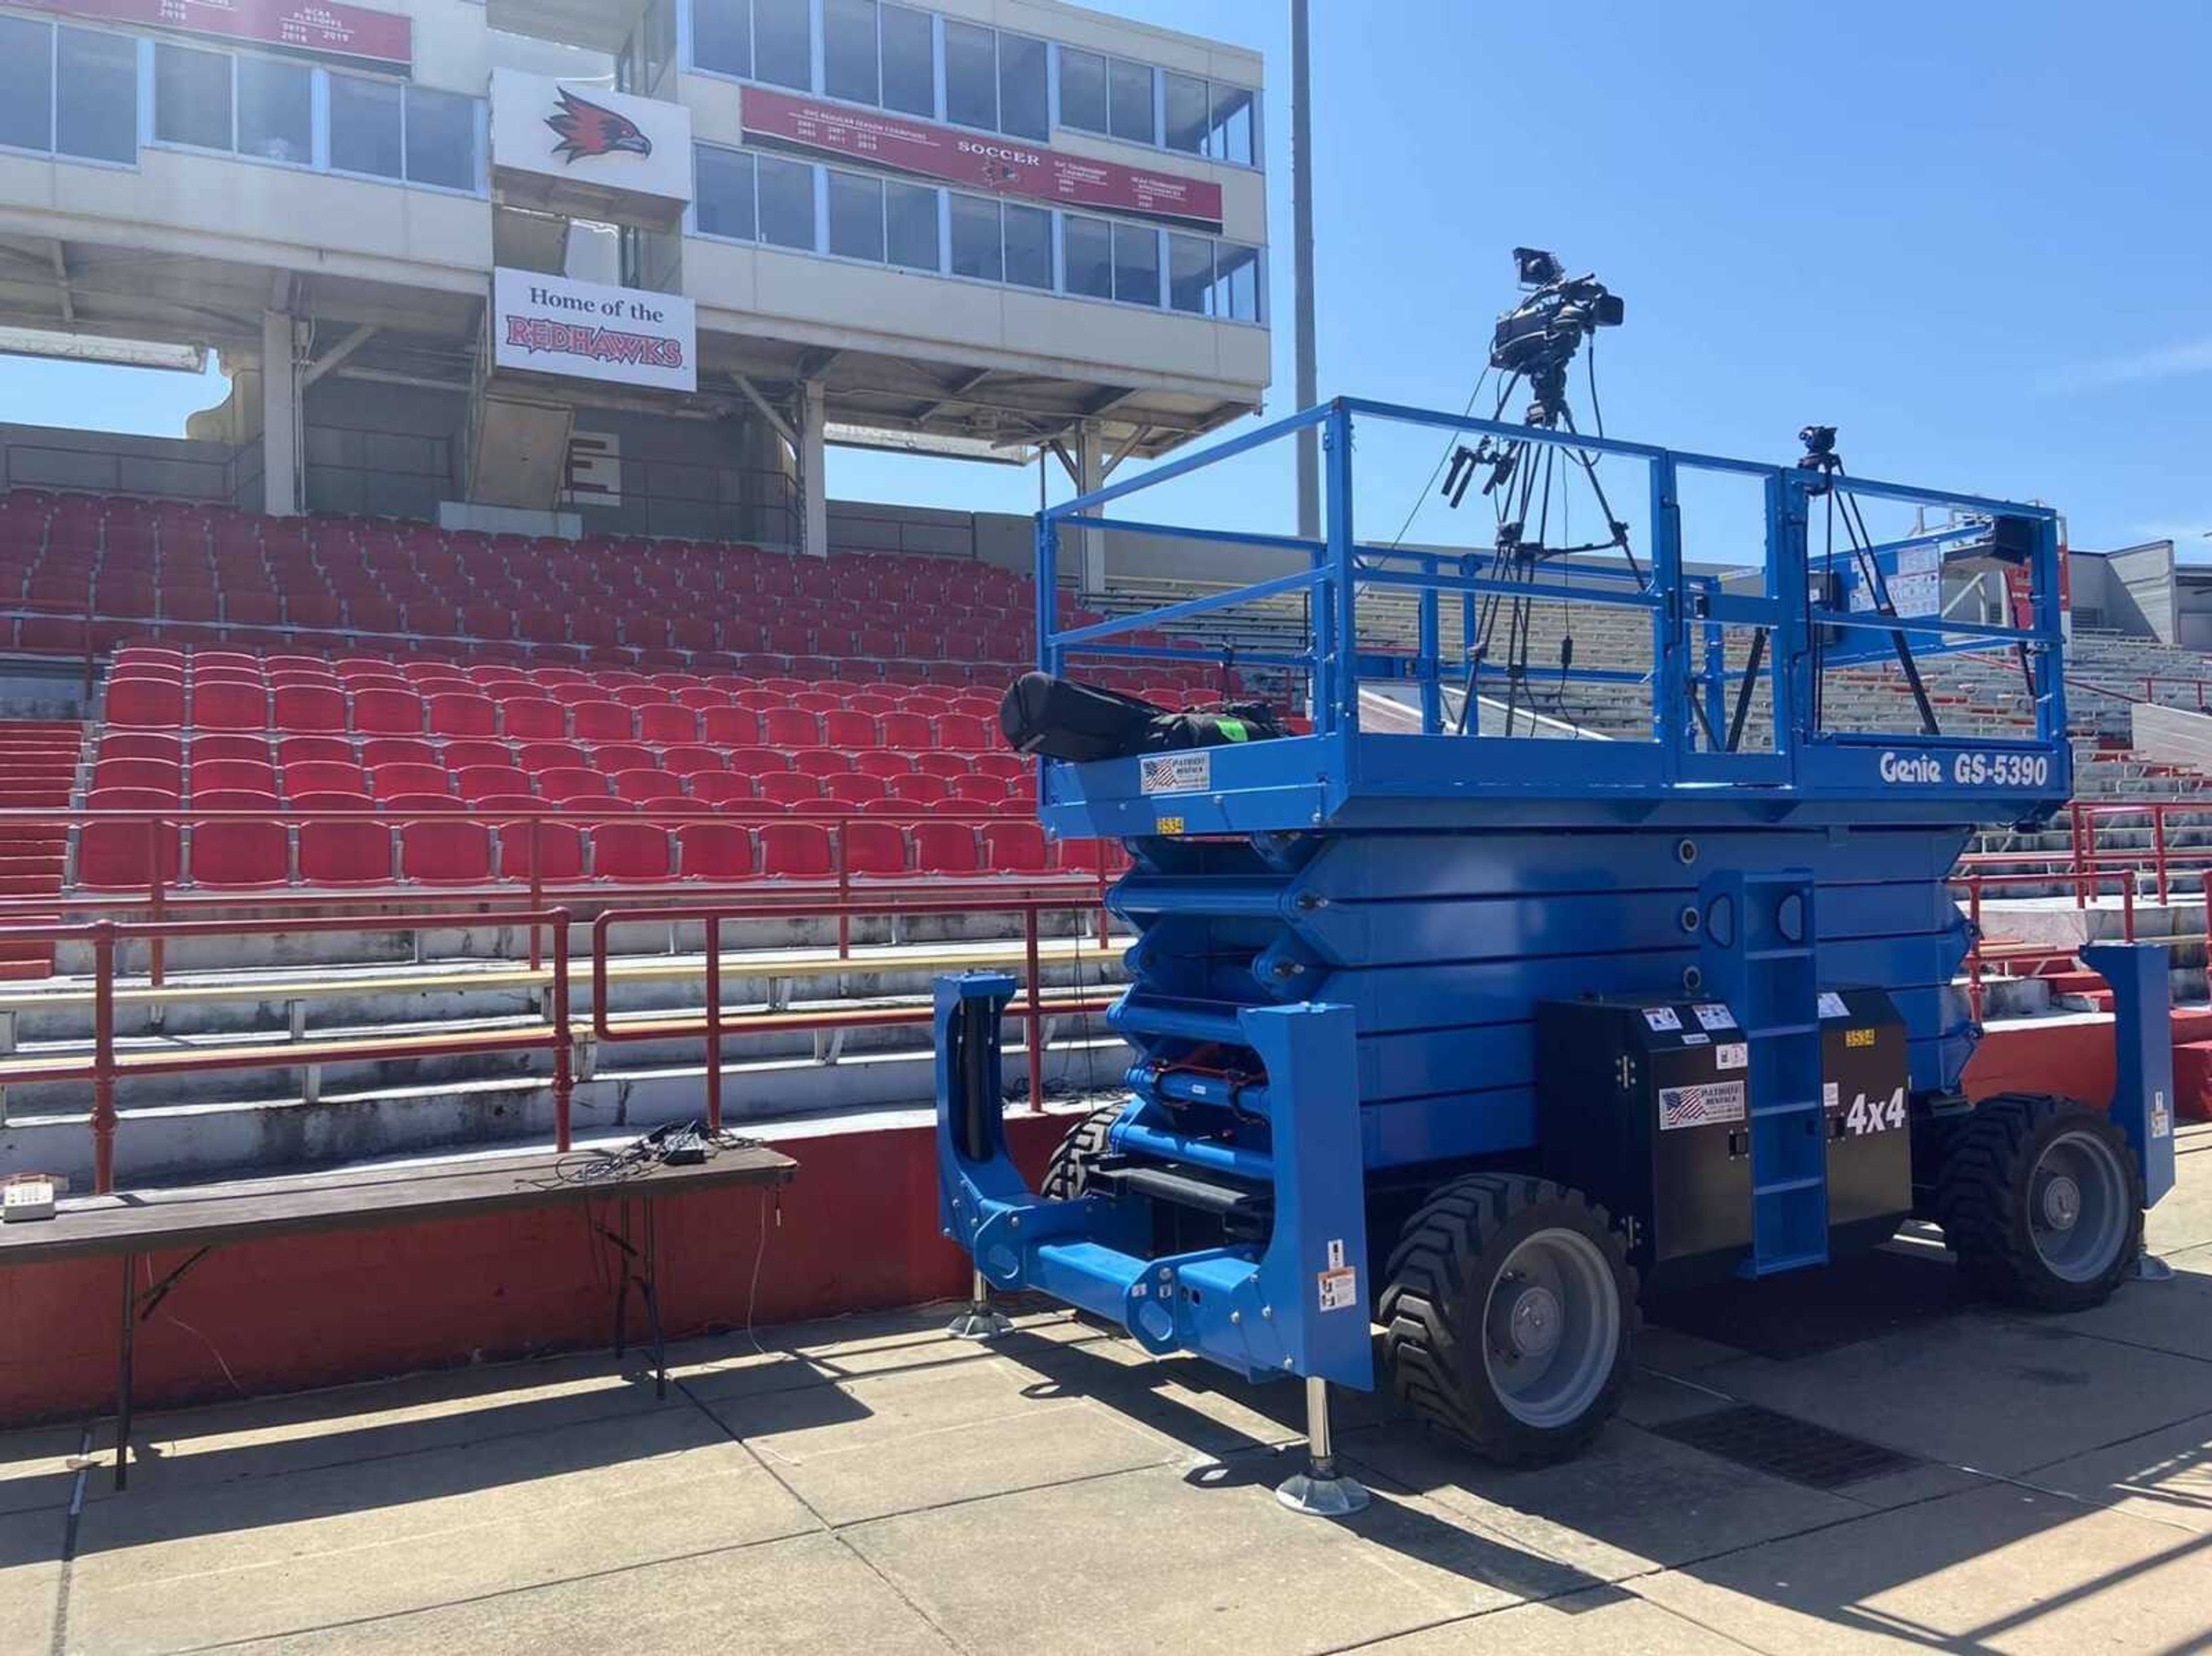 One of the cameras used by the ESPN+ crew sits on a lift that was brought into Houck Stadium to assist with production of football and soccer.